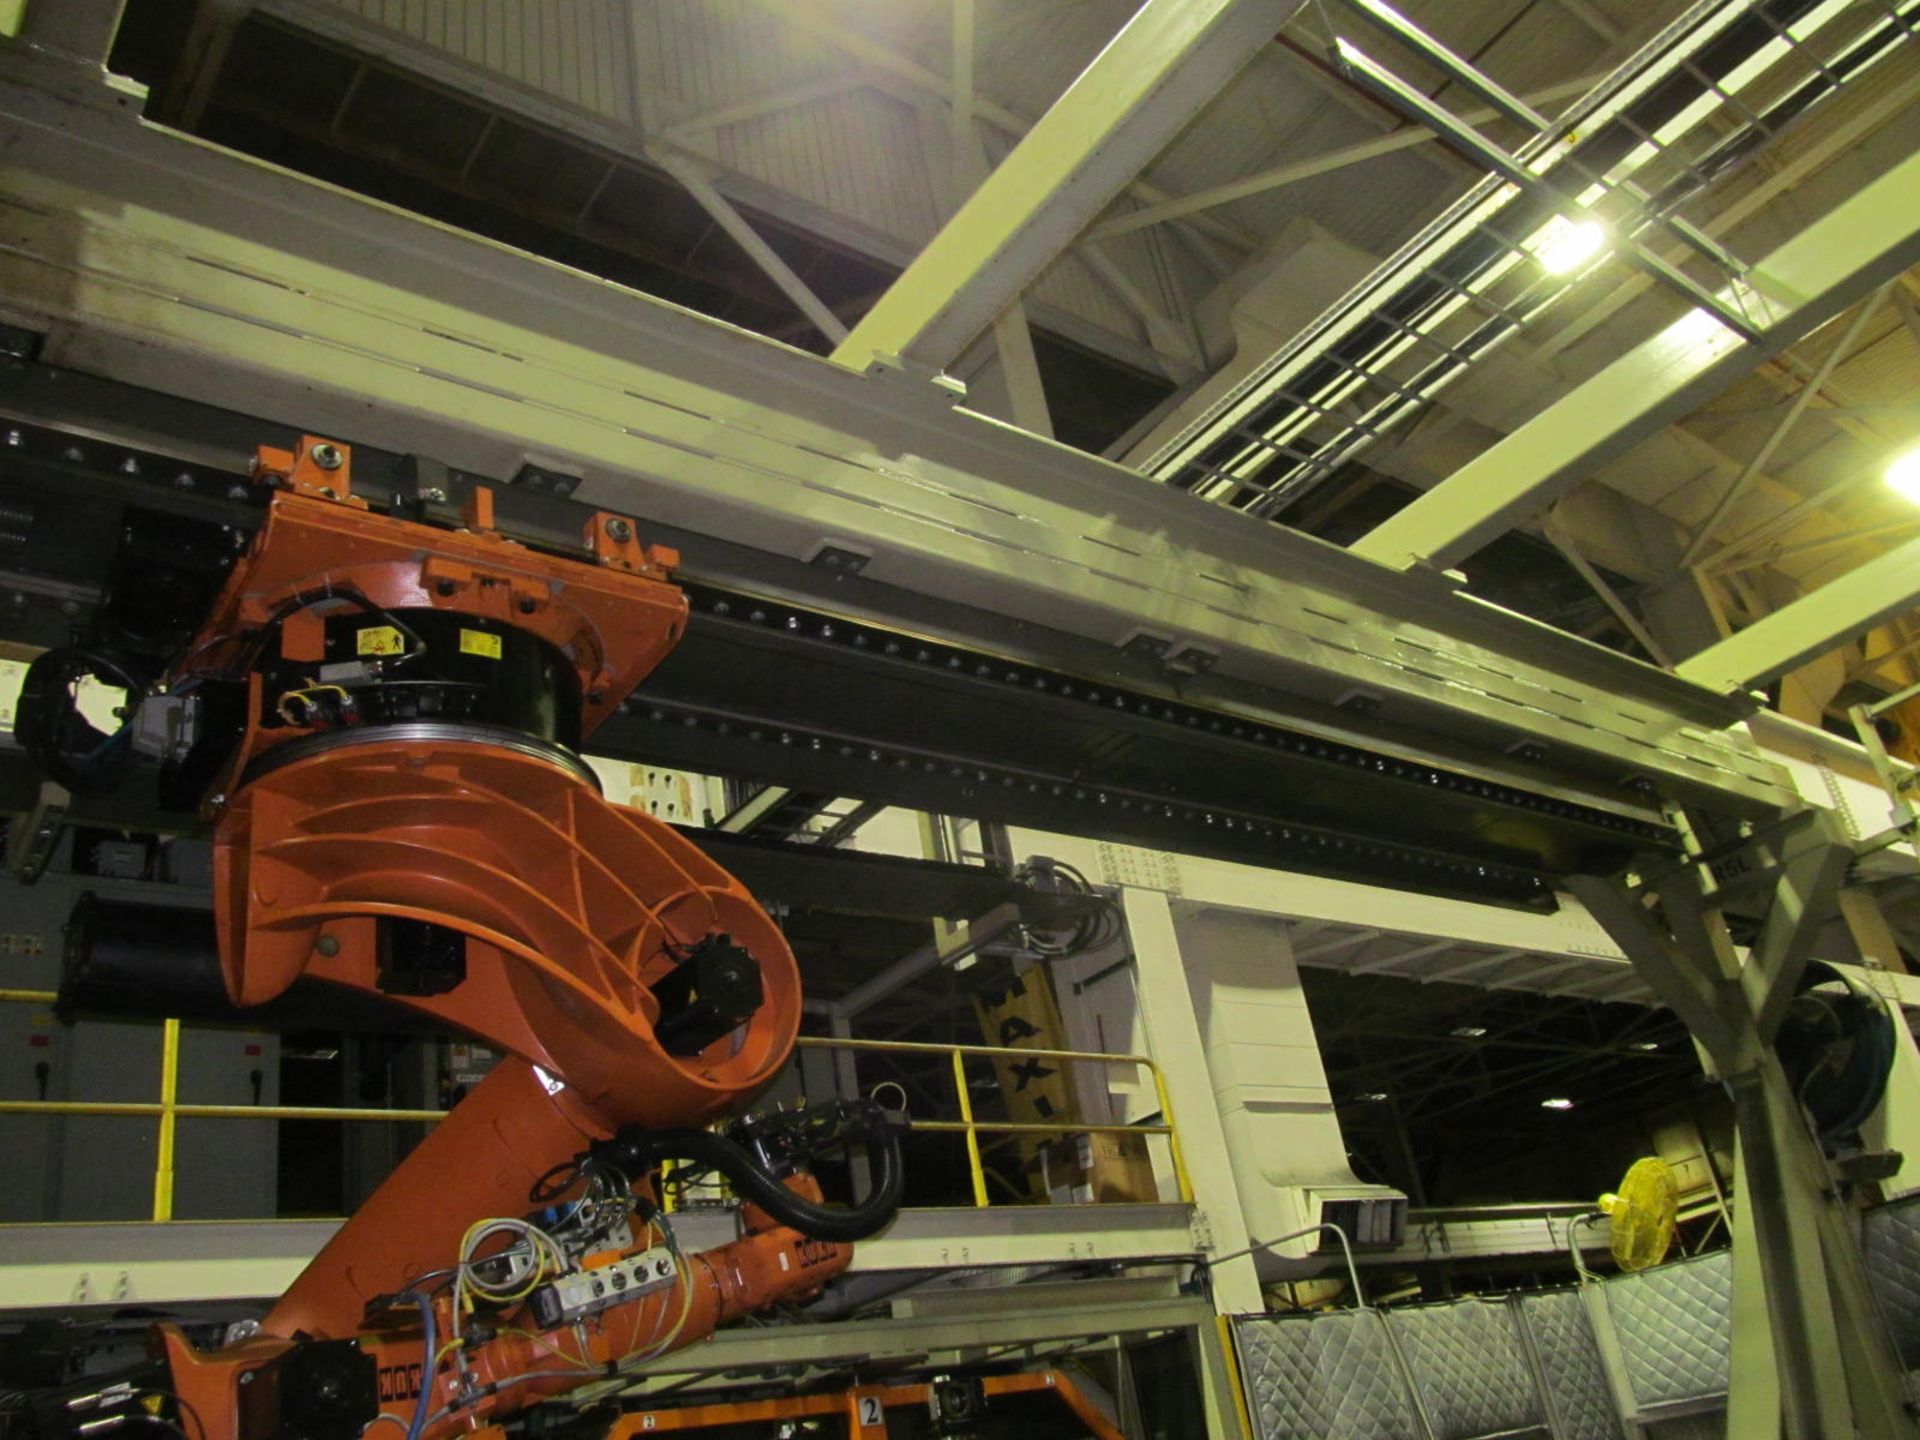 7-AXIS KUKA UNLOADING ROBOT w/ CONTROL & TEACH PAD MOUNTED ON OVERHEAD LINEAR RAIL, *PLEASE NOTE: - Image 2 of 4